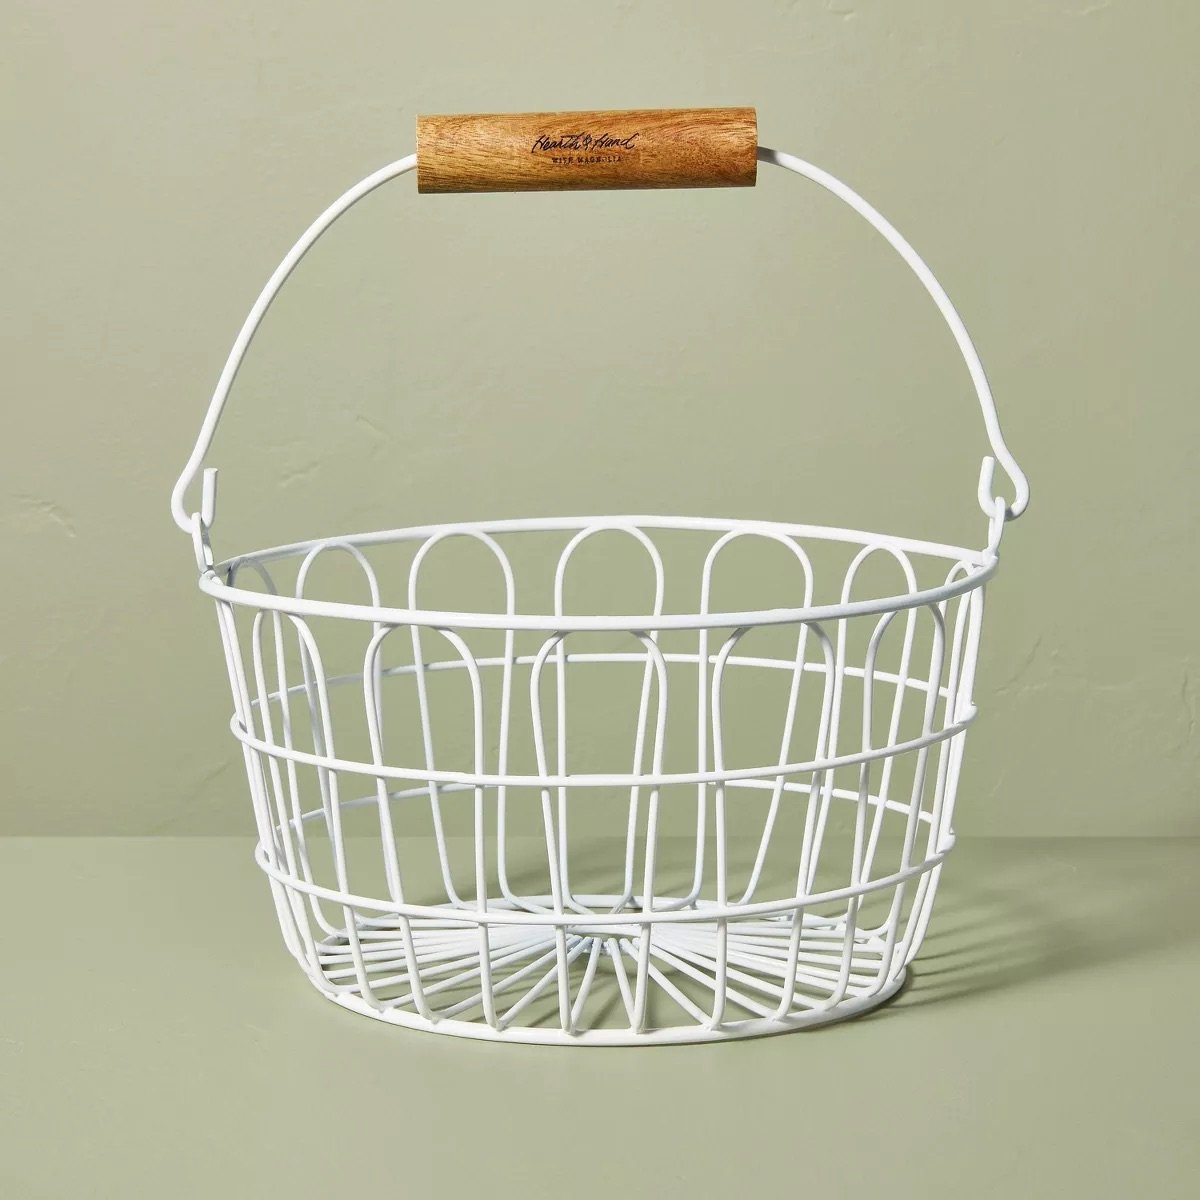 Coated-Wire Easter Basket White Hearth & Hand with Magnolia.jpeg